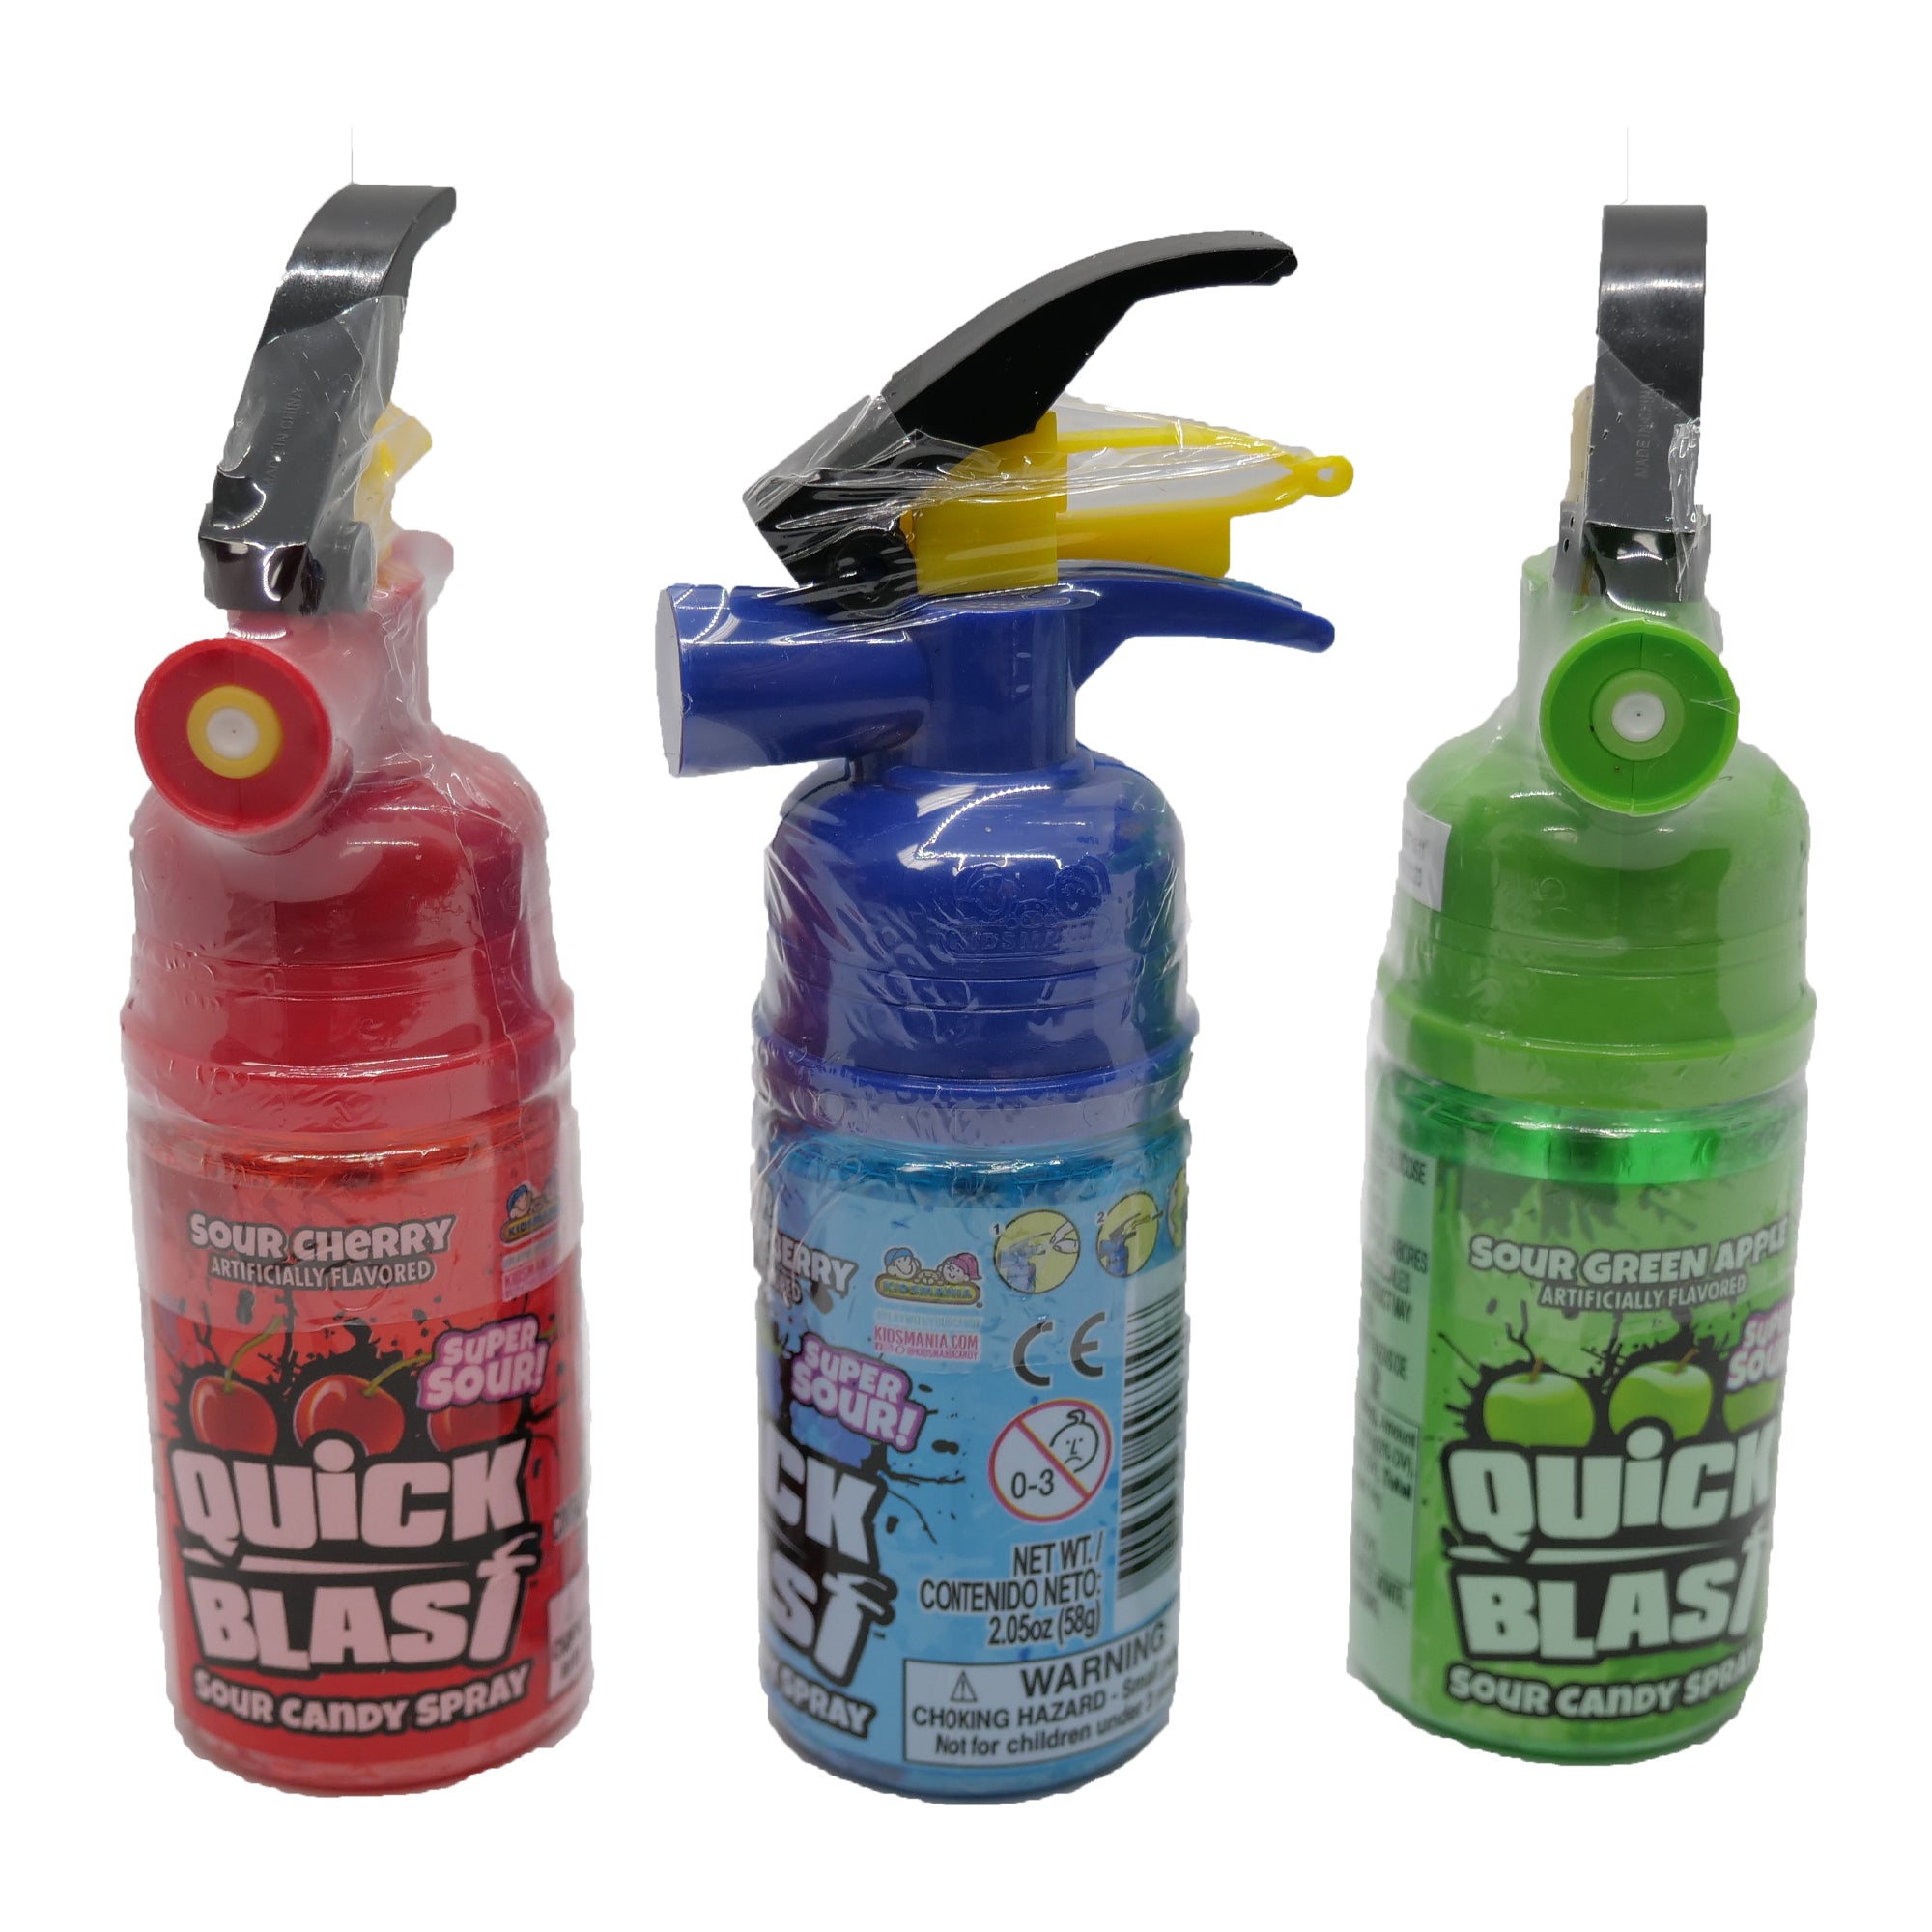 Quick Blast Sour Candy Spray - 2.05-oz. Bottle - All City Candy